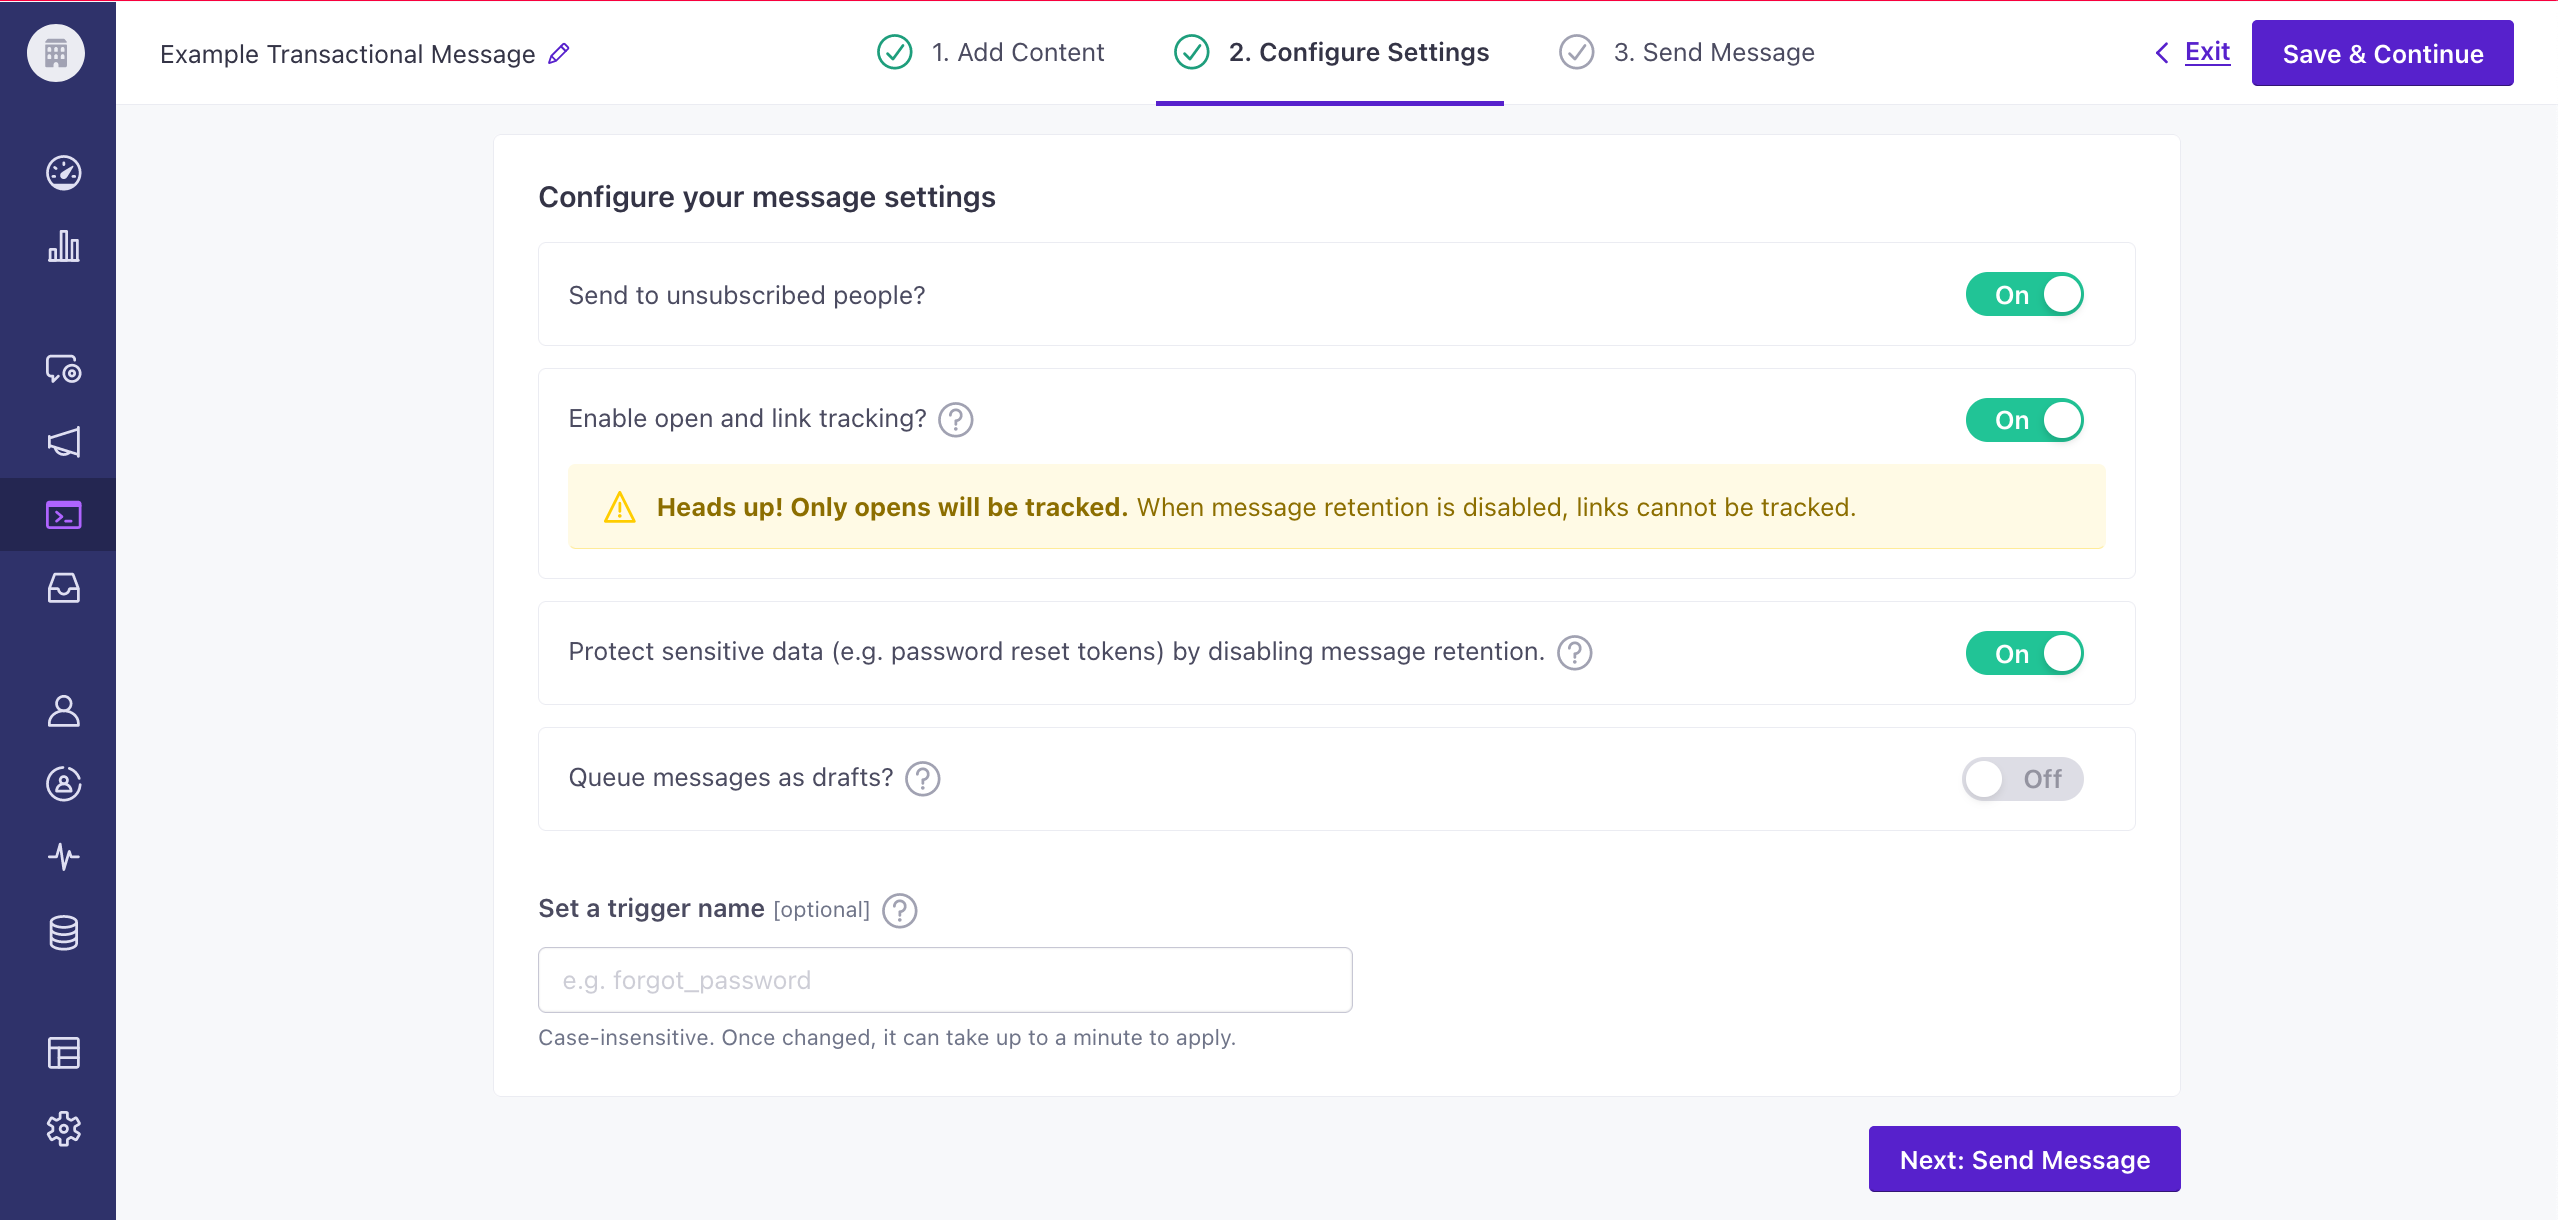 Send transactional messages by Trigger Name